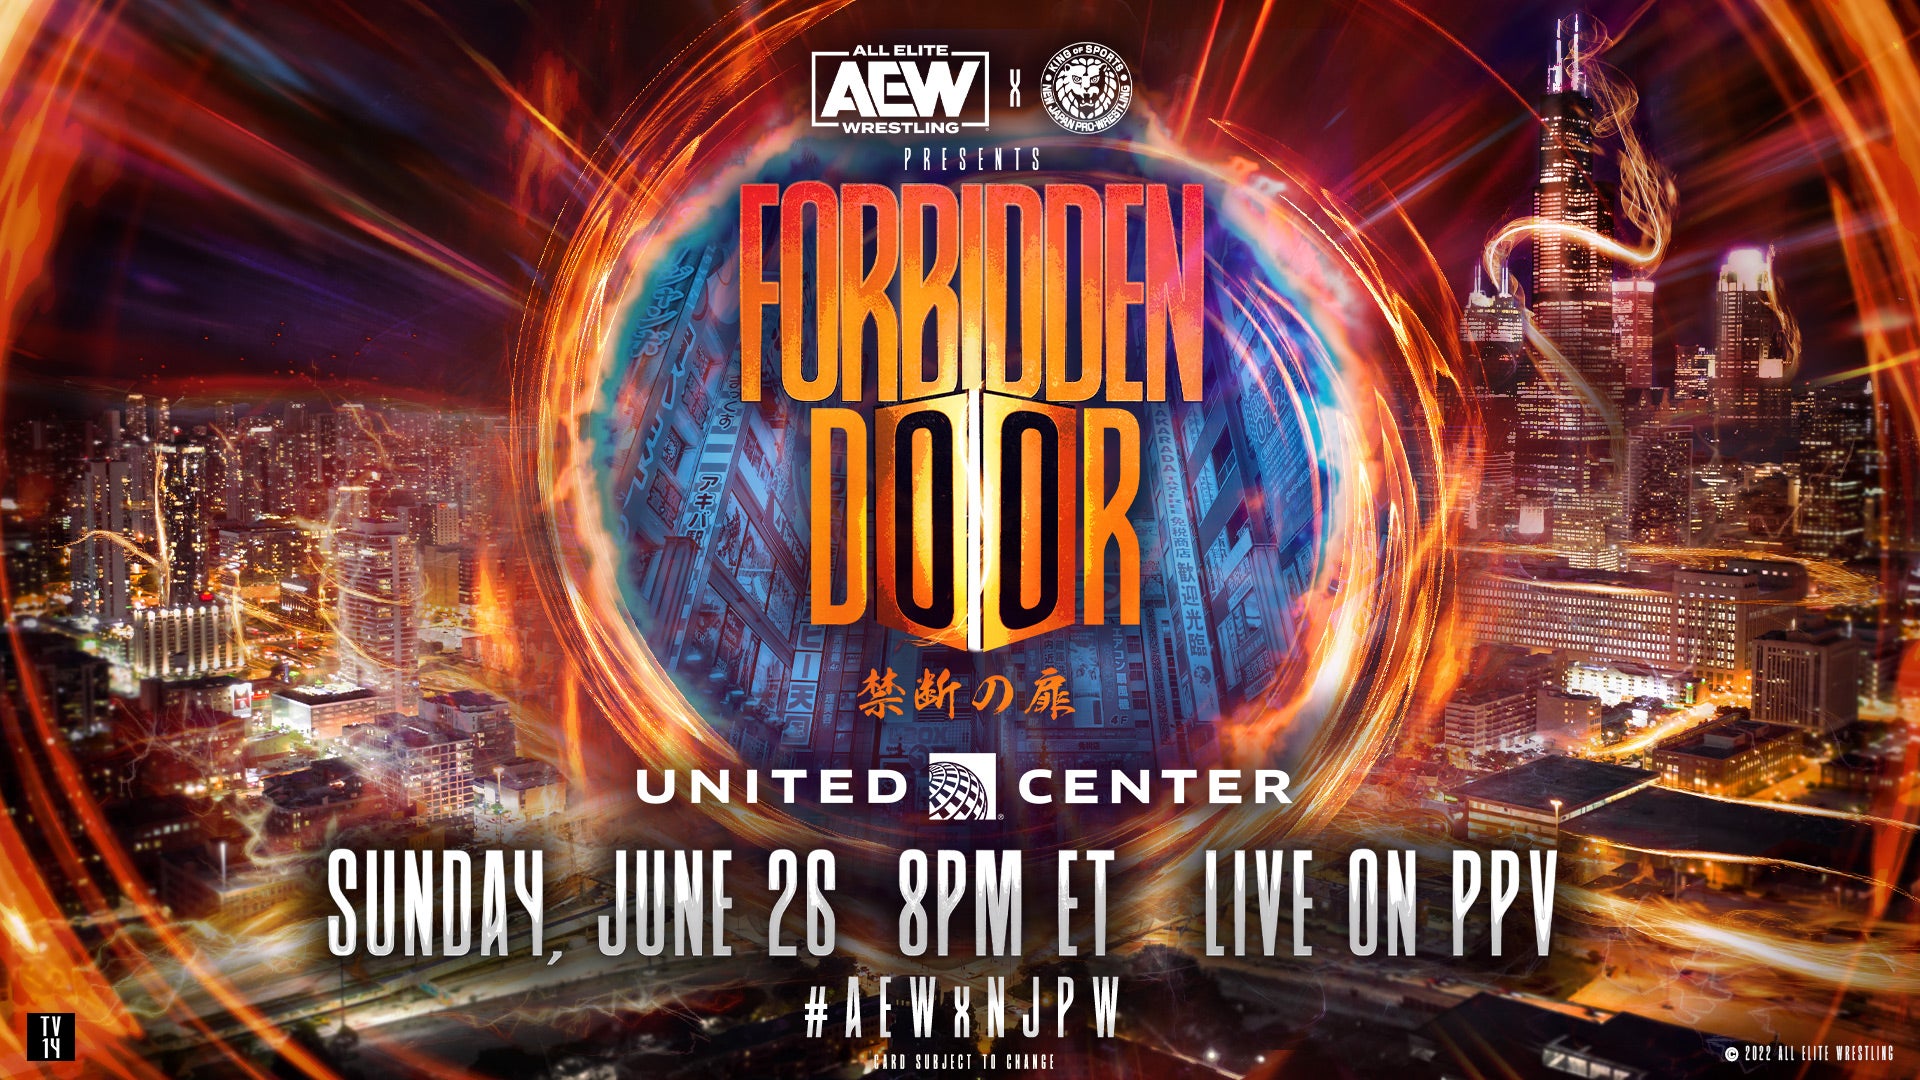 Forbidden Door will take place at the United Center Chicago (AEW)